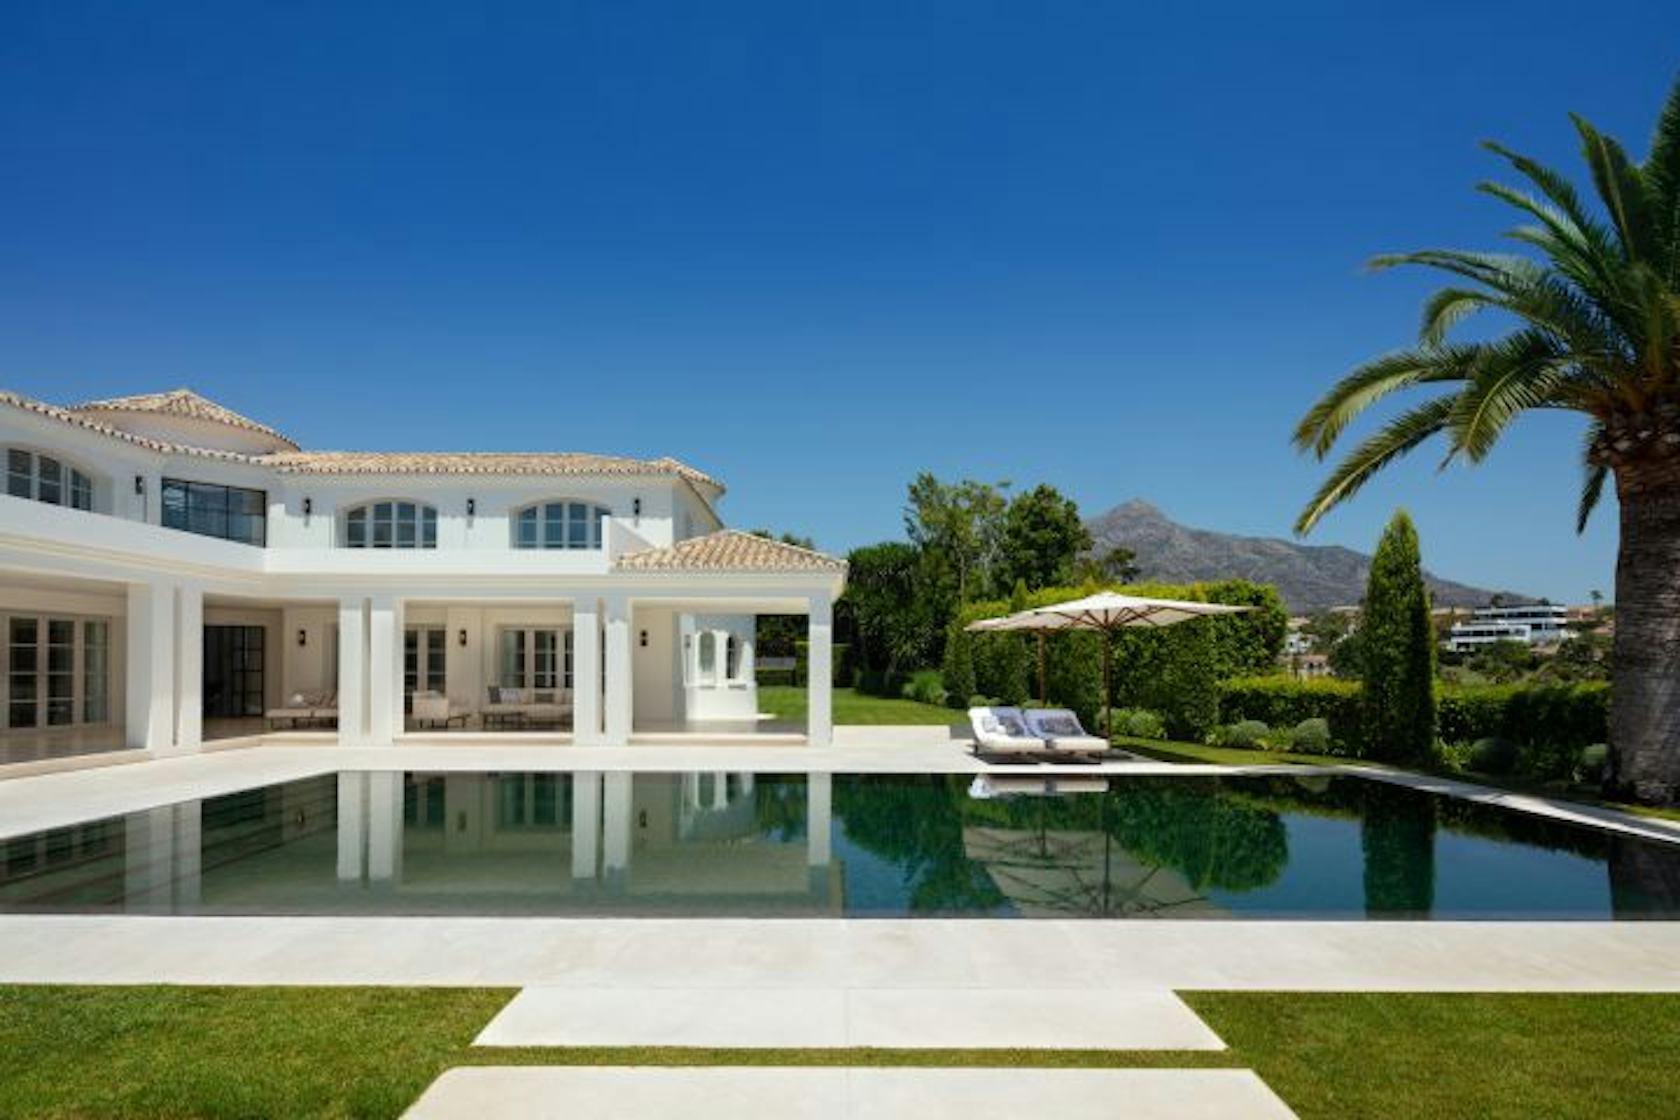 Discover luxury real estate in Marbella: A paradise for property investors